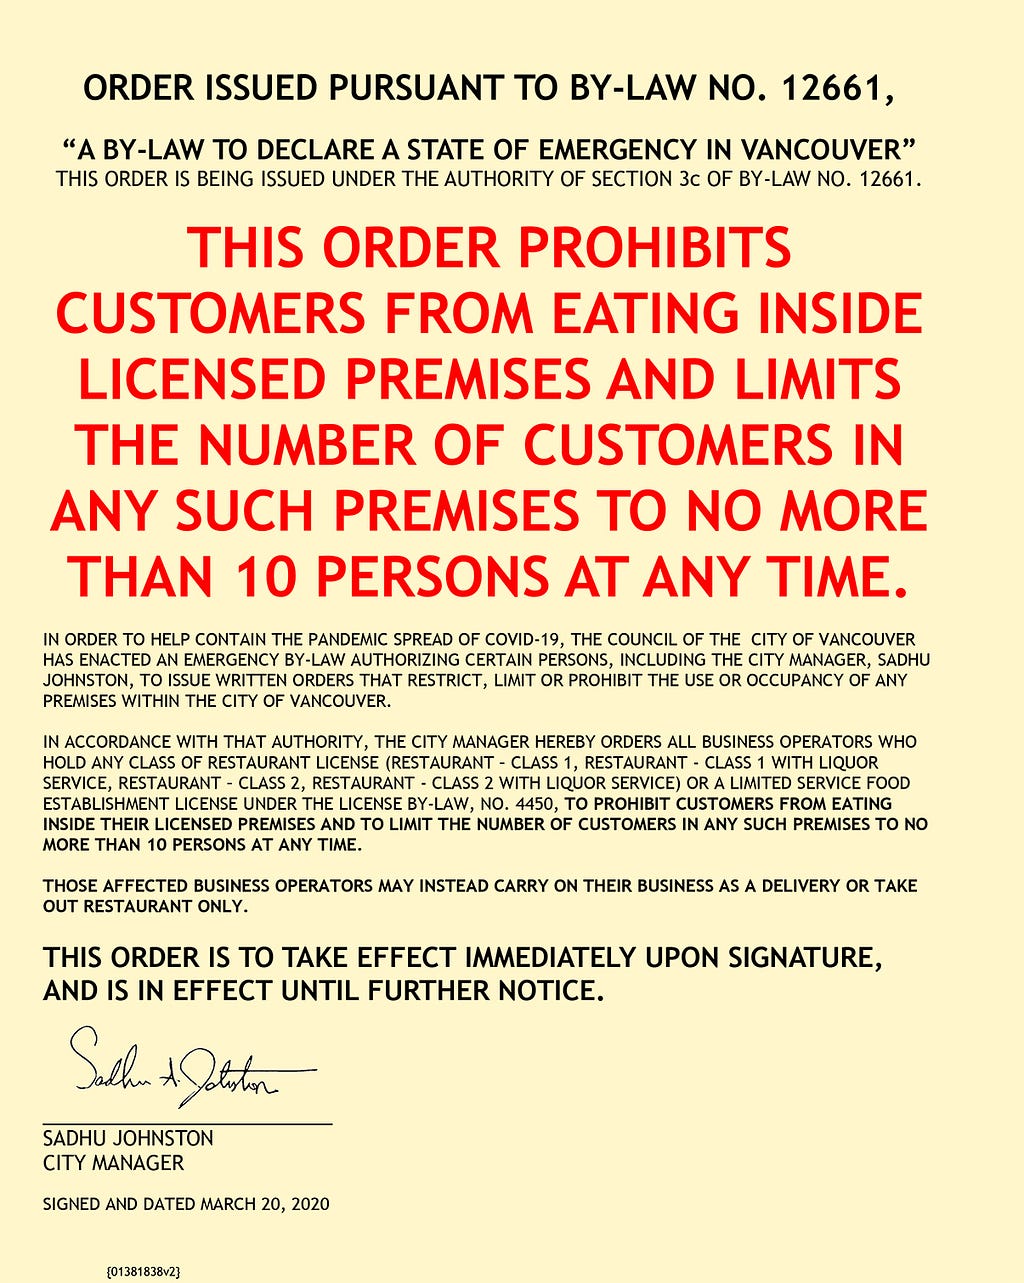 An example of the notice that will be posted to doors of businesses in violation of the emergency order.